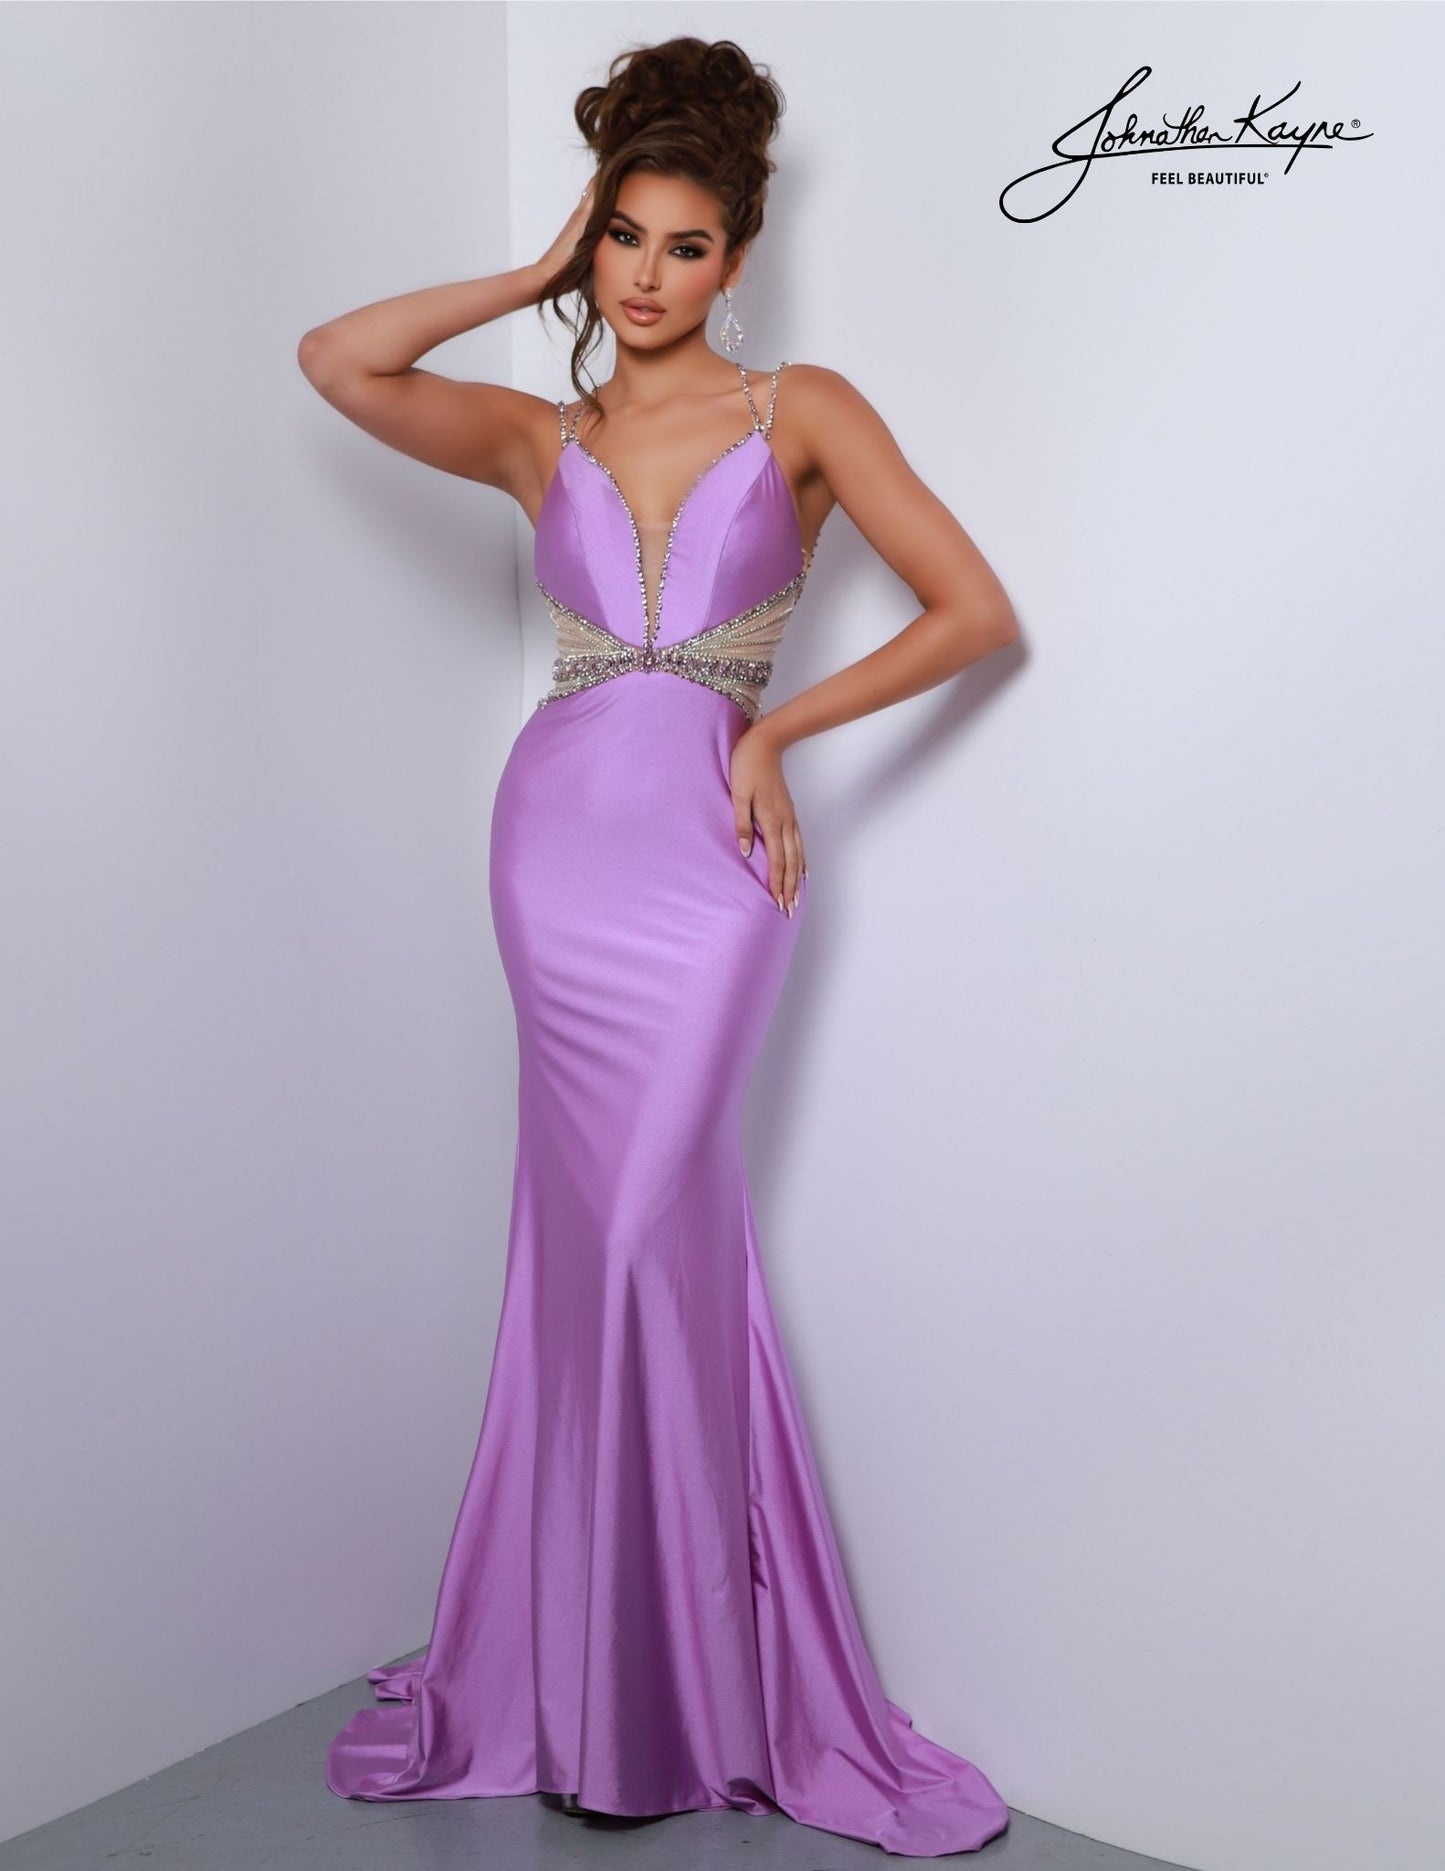 Johnathan Kayne 2808 long prom dress features a stunning beaded design, sheer side cut-outs and a deep V neckline. The perfect formal gown for pageants, dances, and special occasions. Experience elegance and comfort in this 4-Way Stretch Lycra gown. The beaded sheer side cut-outs and deep V neckline create a sultry, stylish look for any special occasion.